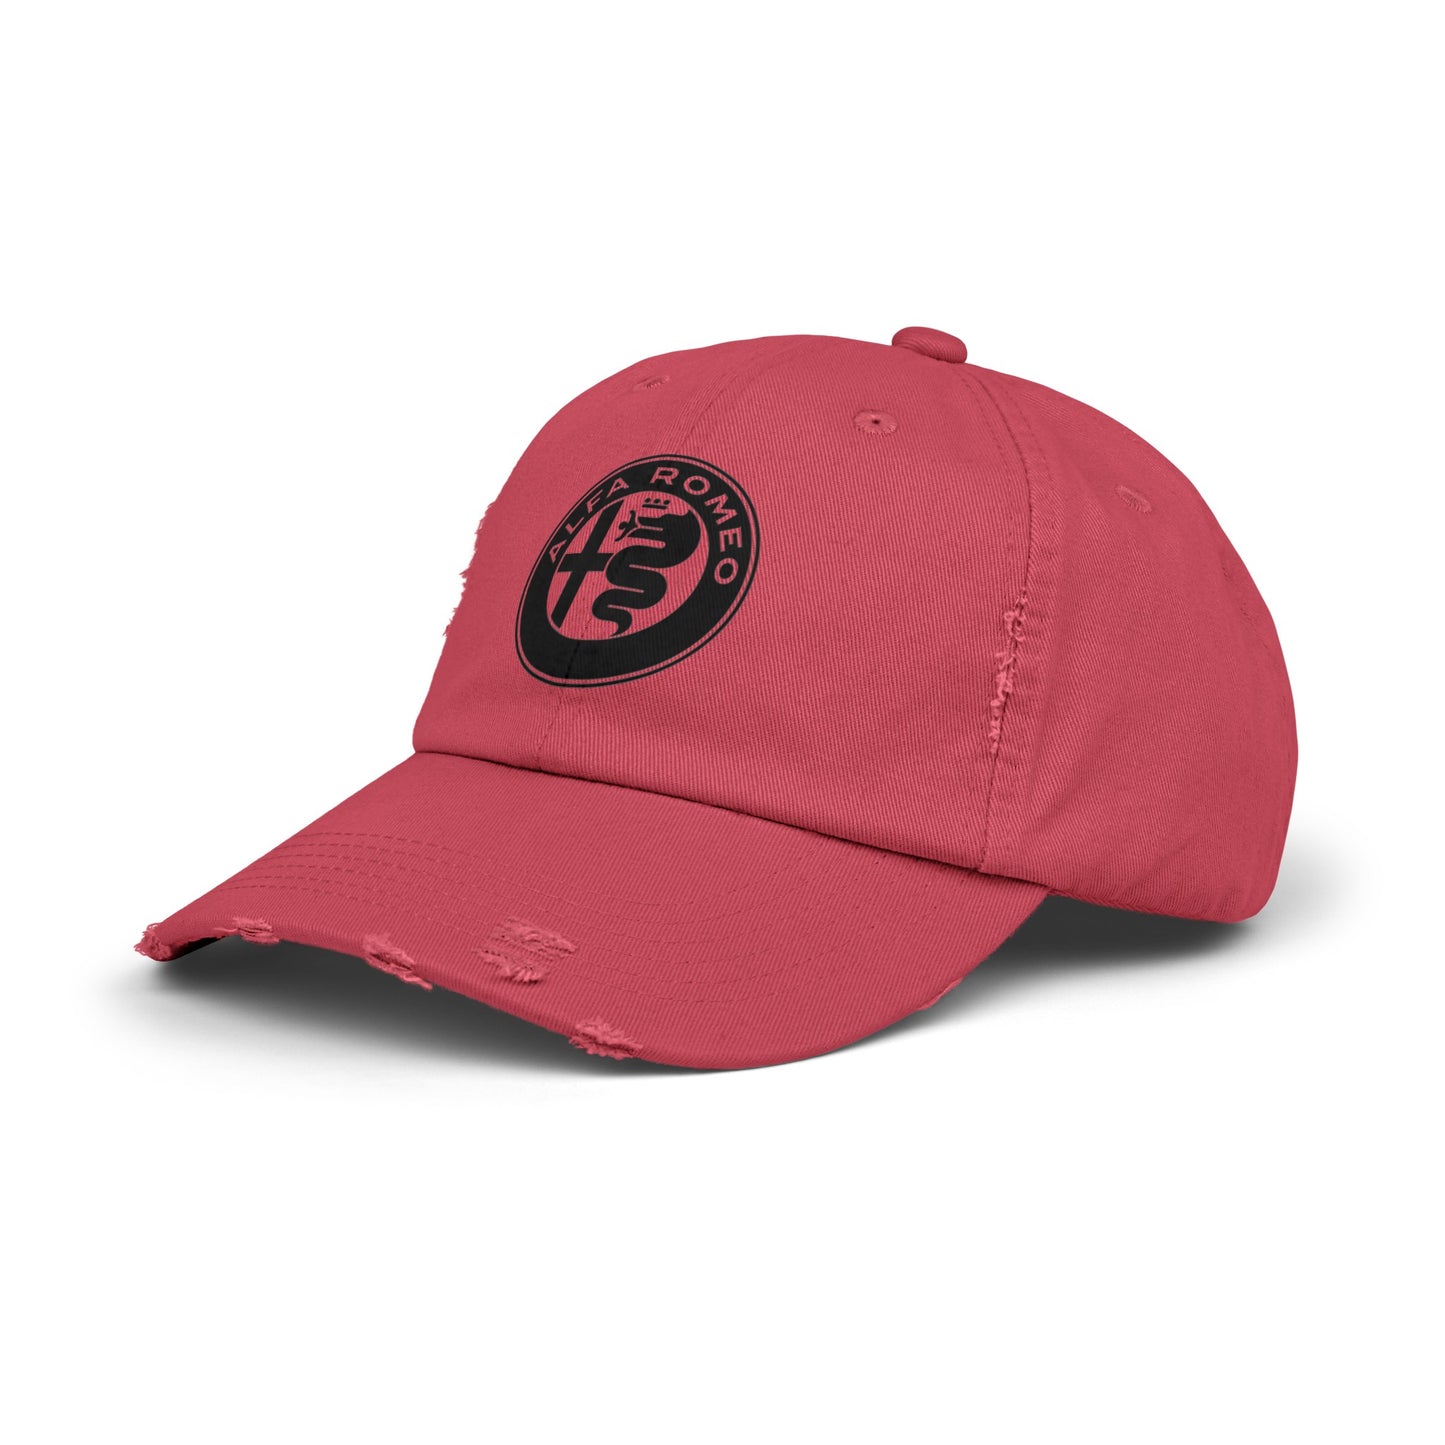 Alfa Romeo Distressed Cap - Unisex 100% Cotton Twill - Adjustable Fit - Stylish and Durable - Perfect for Car Enthusiasts